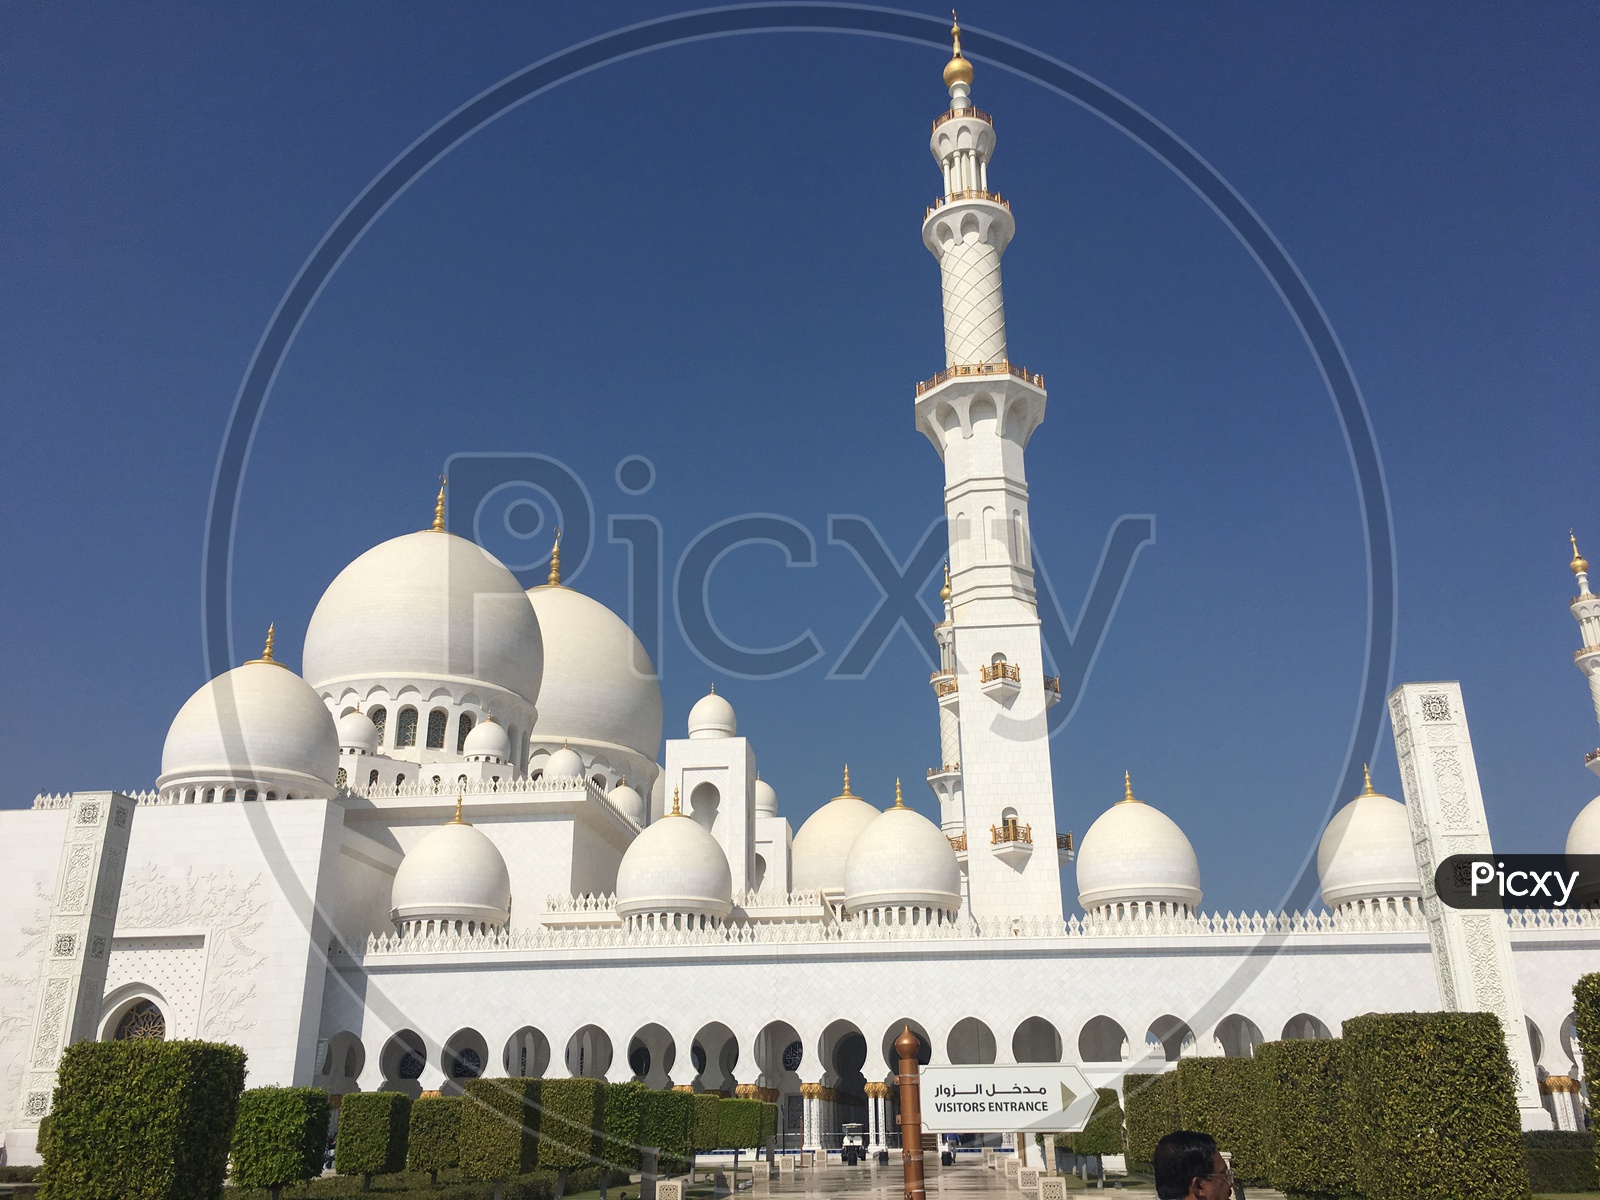 Sheikh Zayed Mosque also known as Grand Mosque